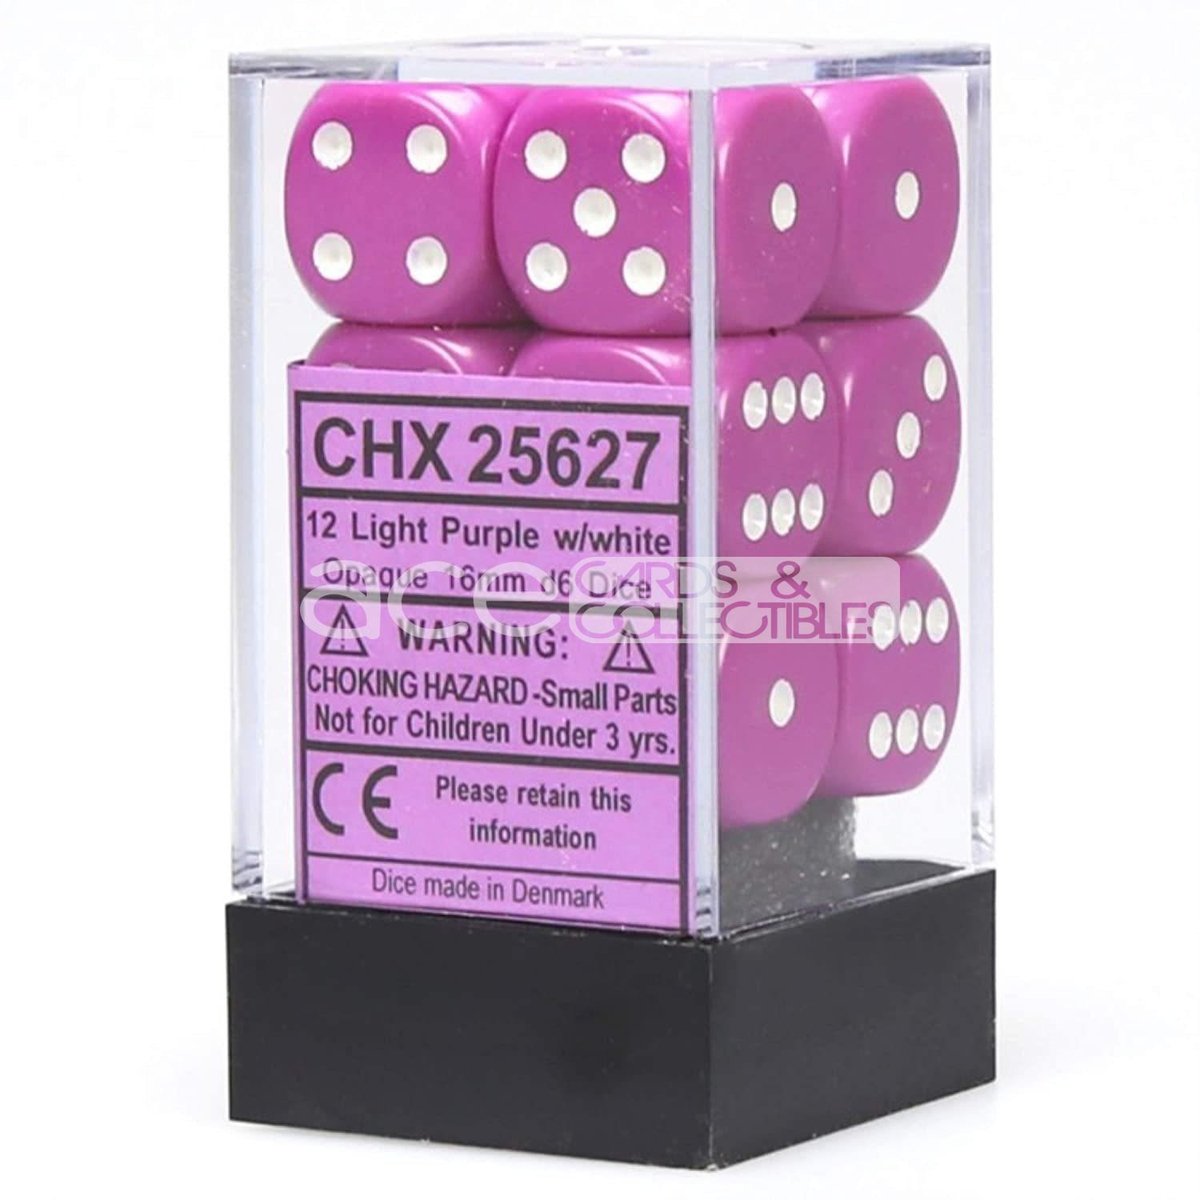 Chessex Opaque 16mm d6 12pcs Dice (Light Purple/White) [CHX25627]-Chessex-Ace Cards &amp; Collectibles